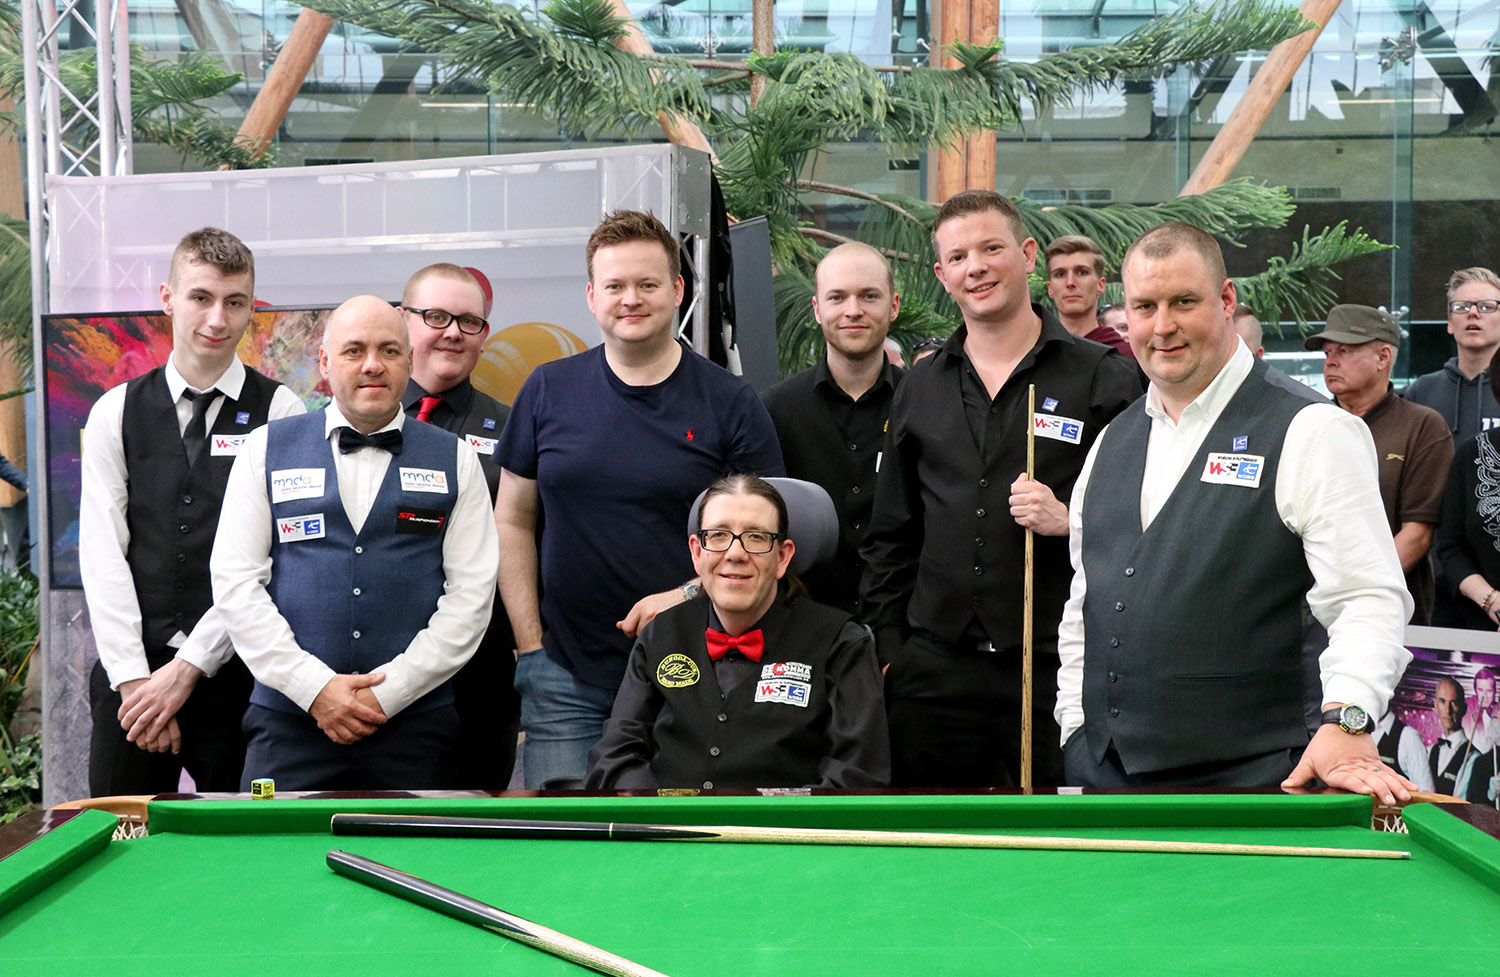 World Disability Snooker Day 2022